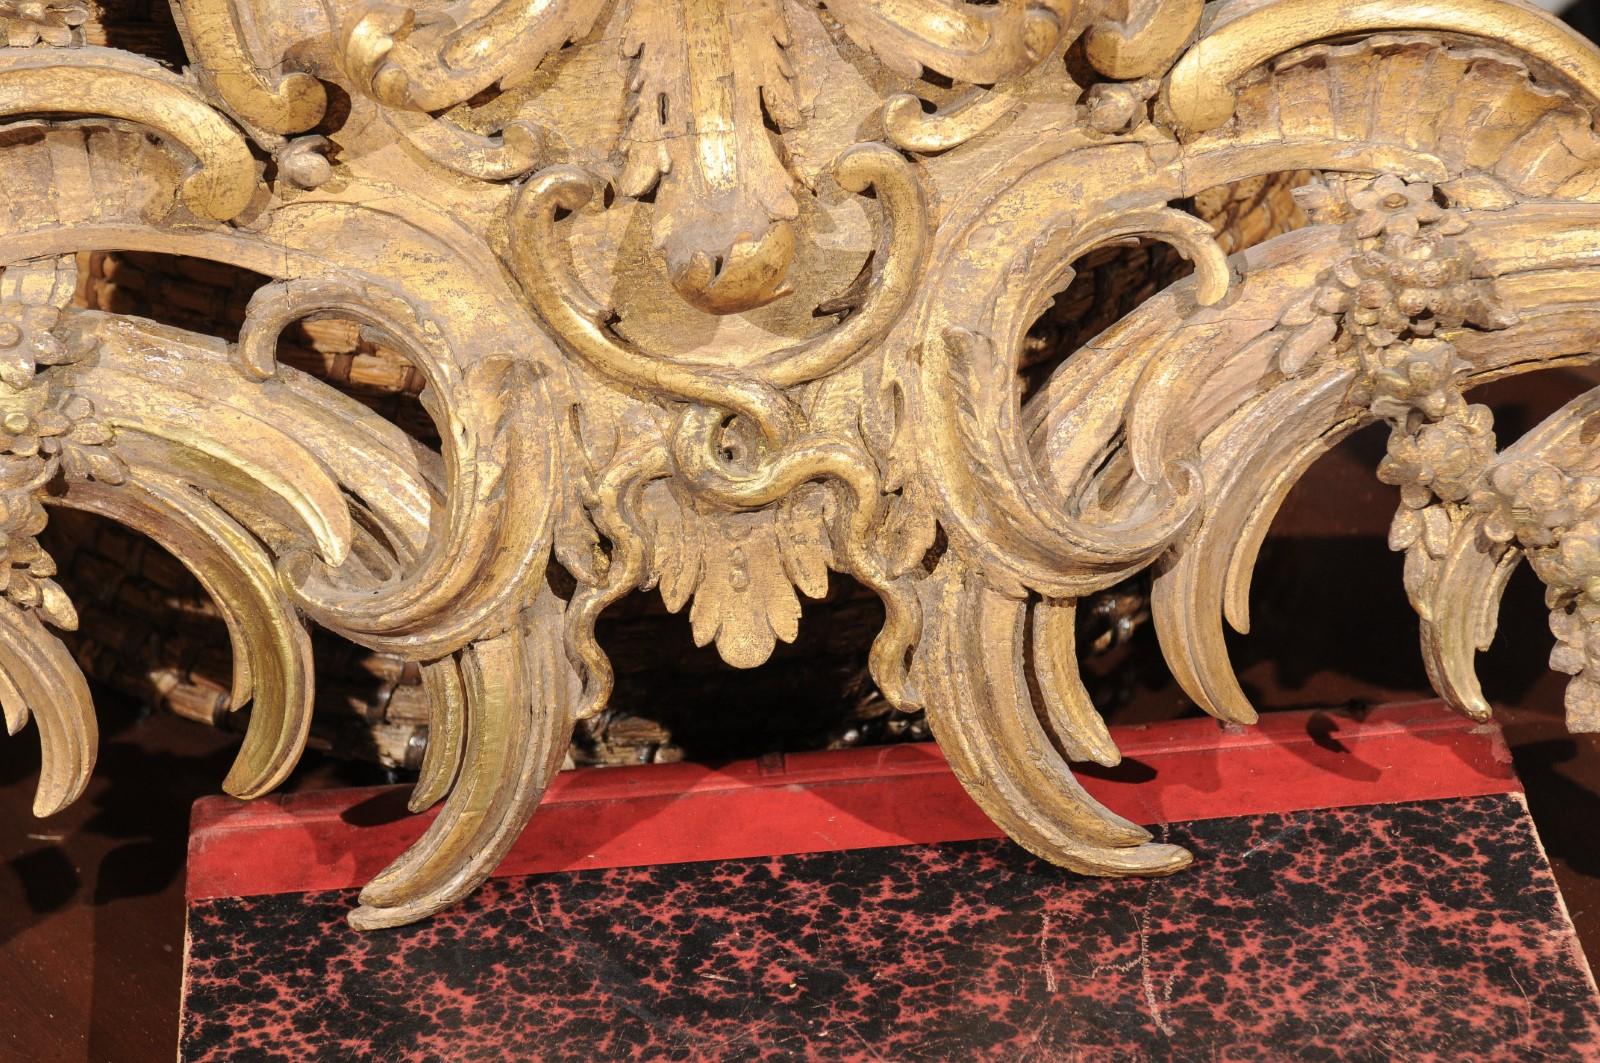 French Rococo Style Parcel-Gilt Carved Architectural Swag from the 19th Century (19. Jahrhundert)